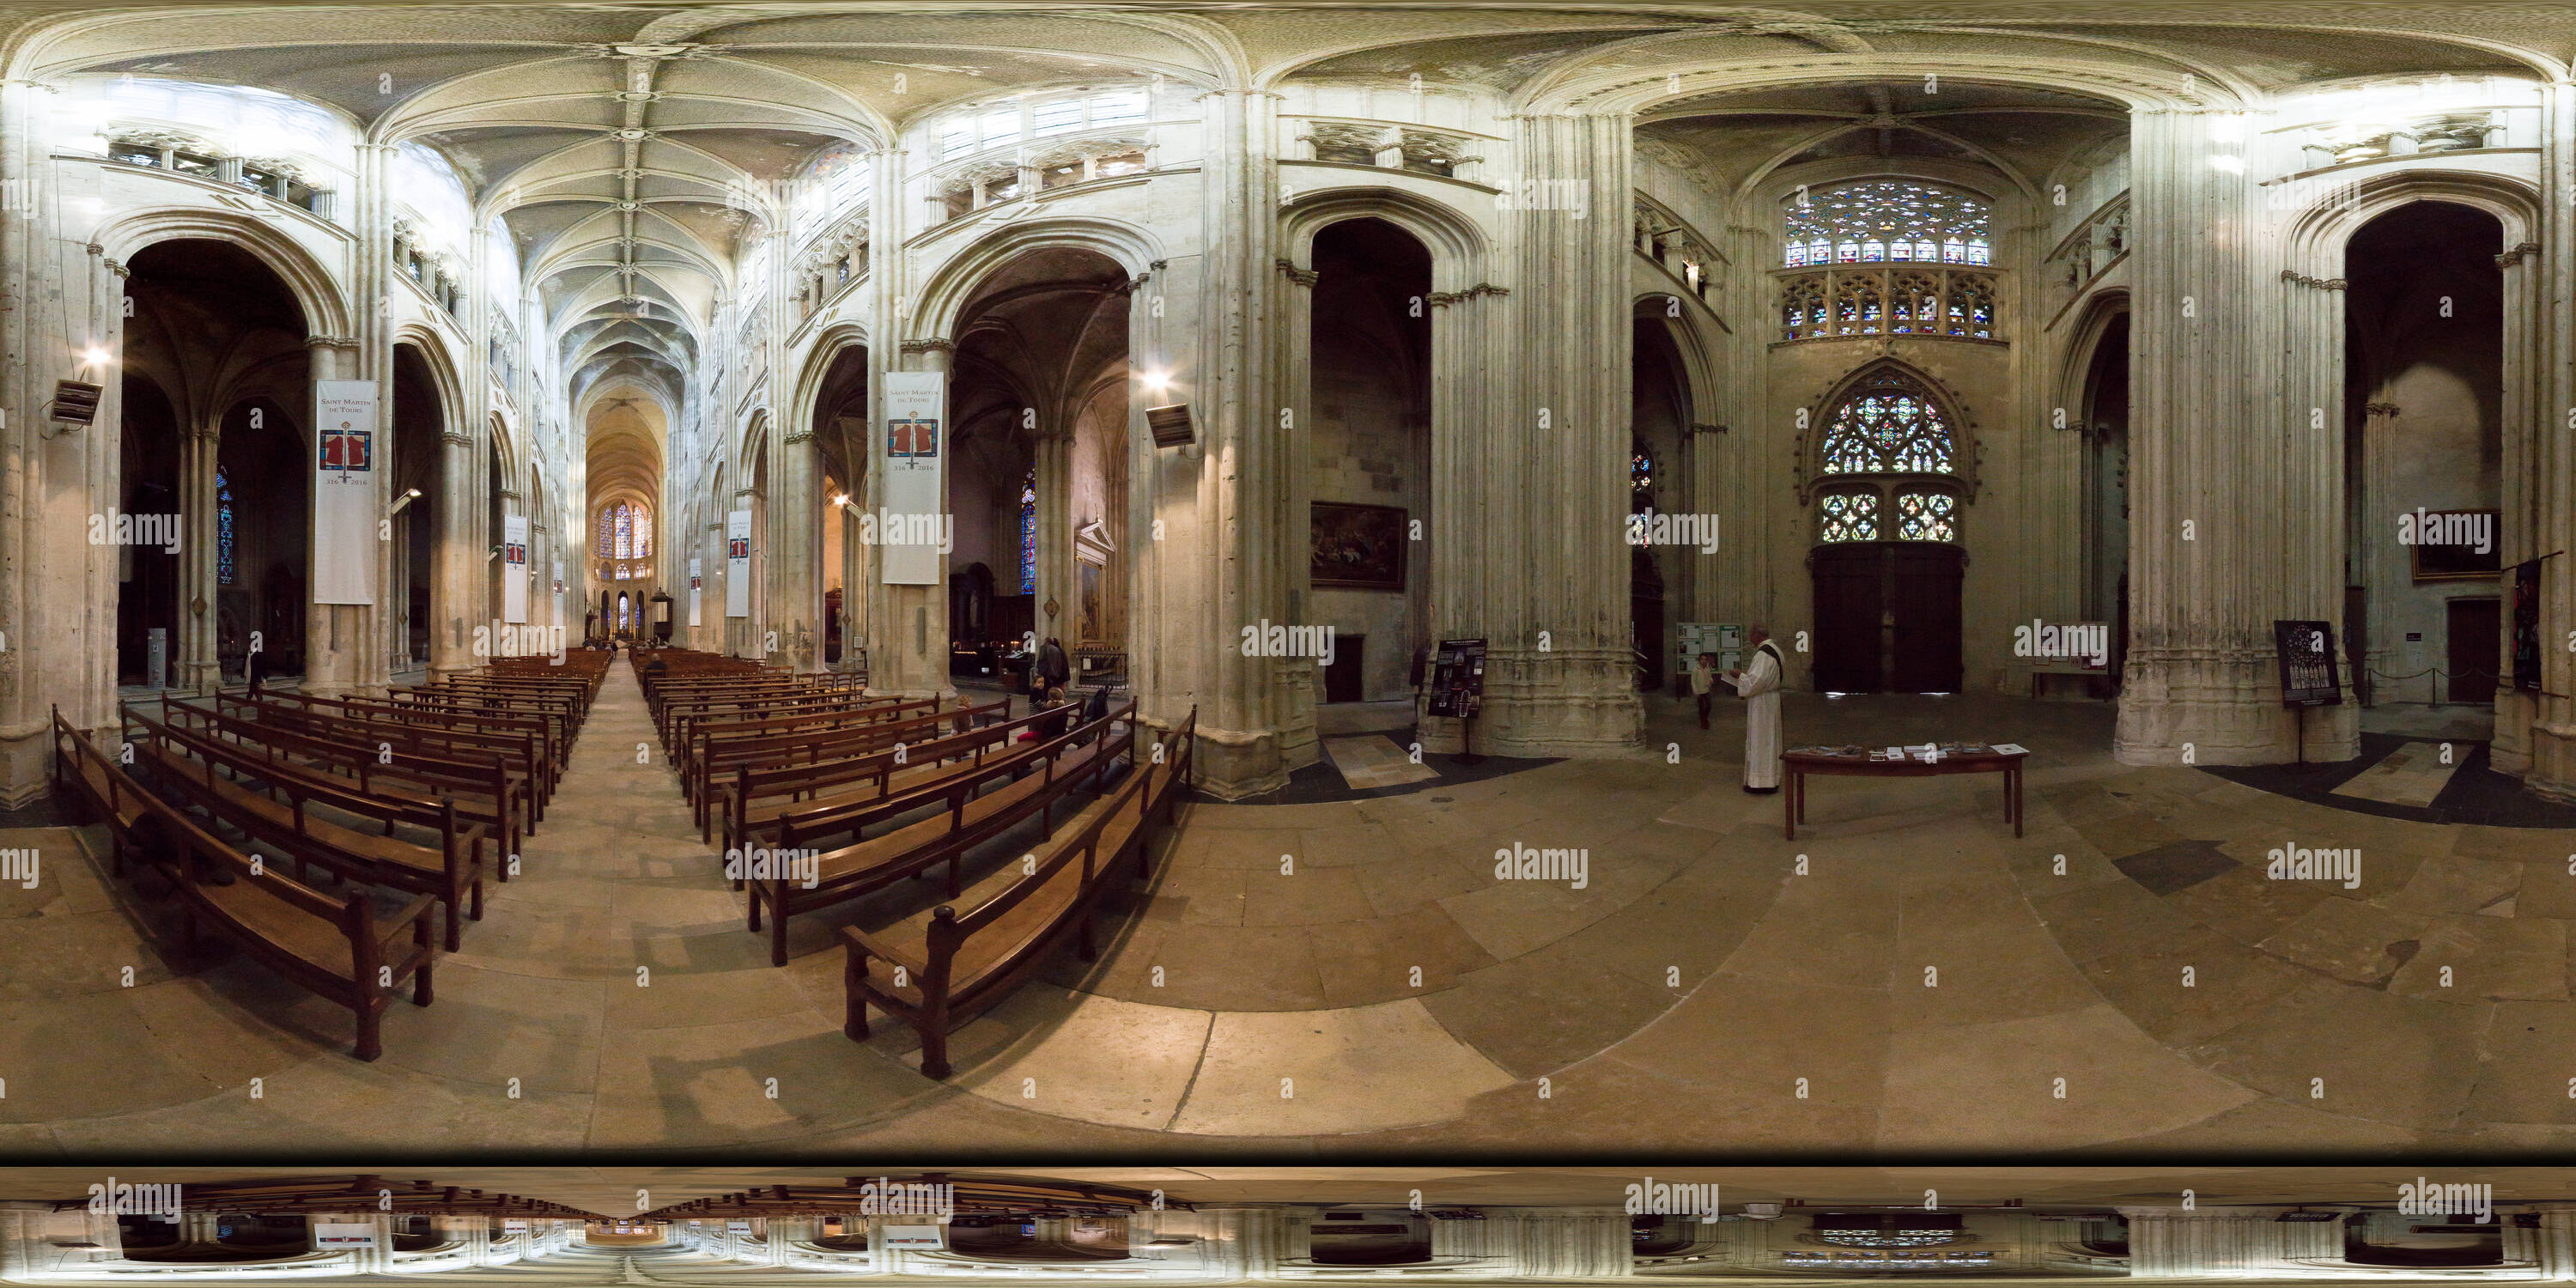 360 degree panoramic view of Cathedral St Gatien (West), Tours, 2016-10, freehand